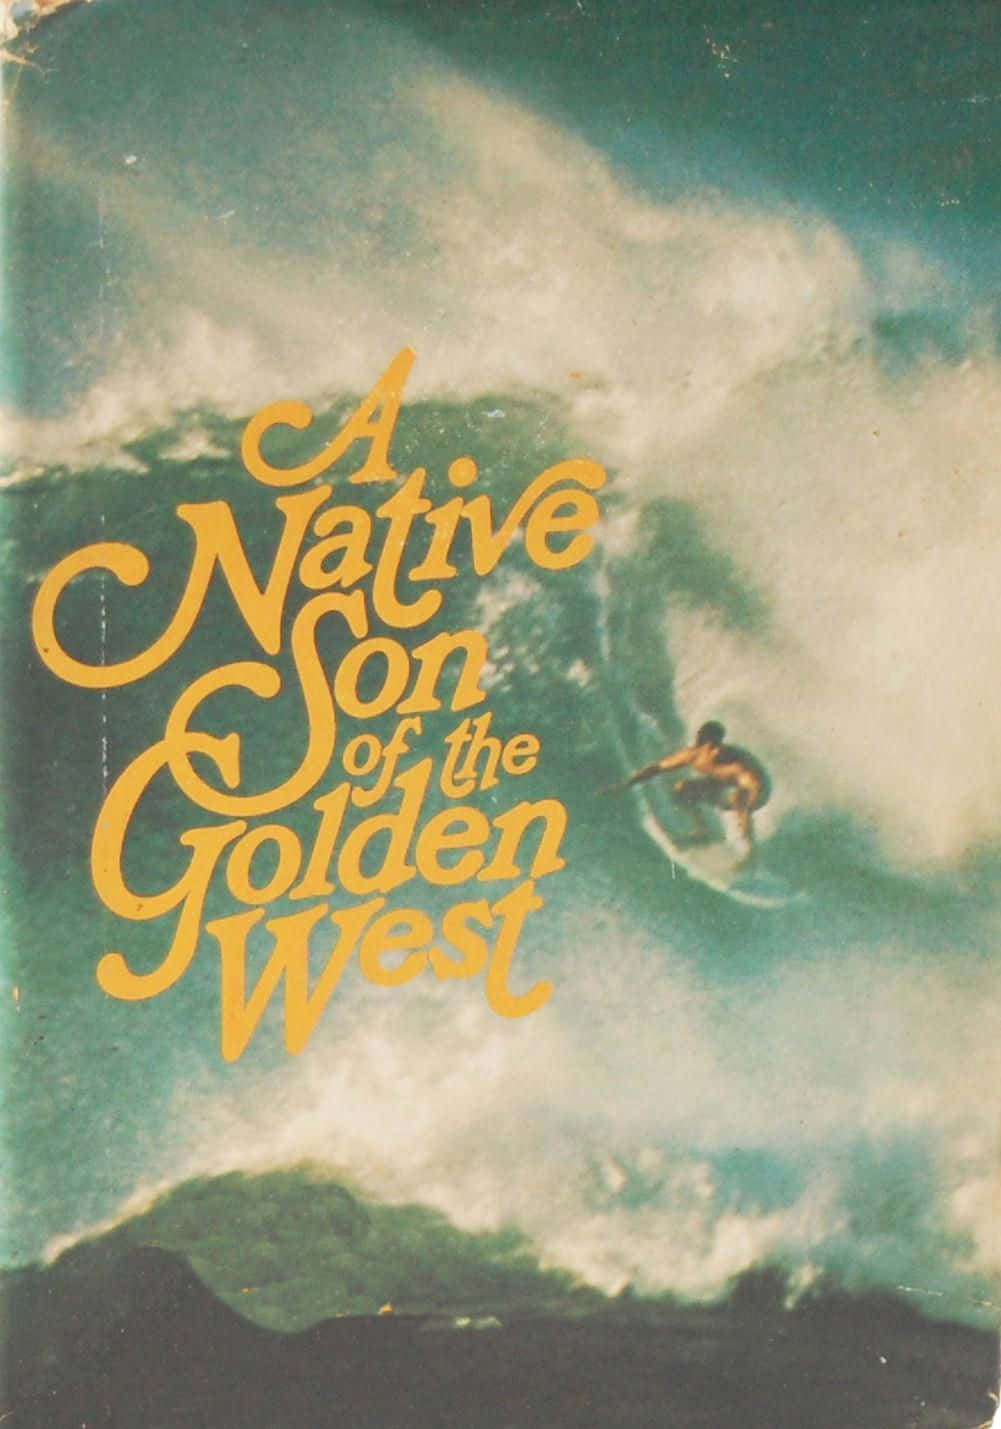 Capture the Waves with VINTAGE SURF Wallpaper